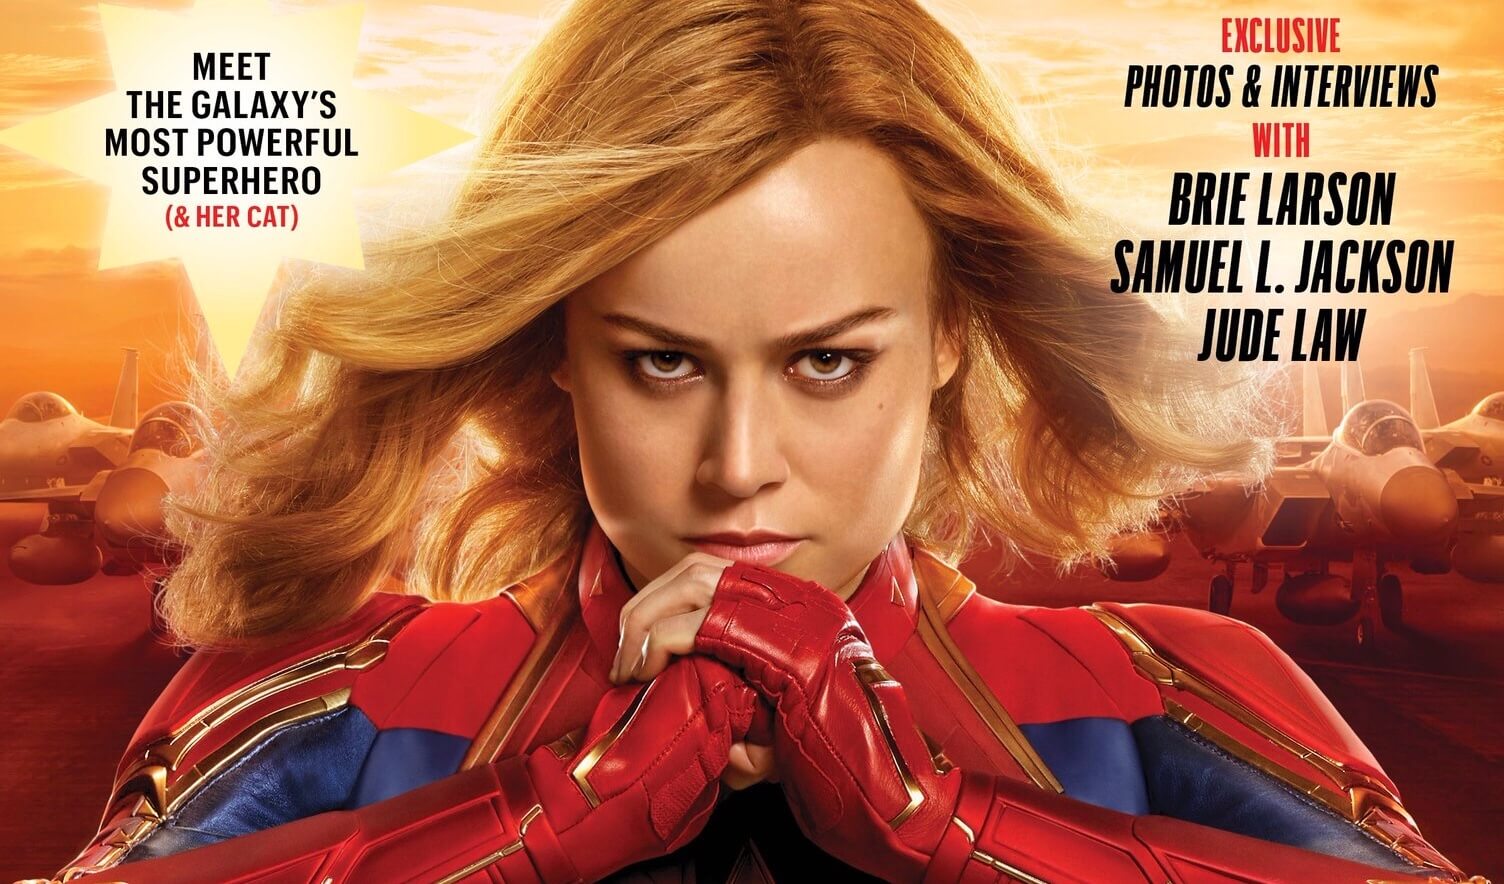 ‘Captain Marvel’ Soars On To The Cover Of Entertainment Weekly; New TV Spots Released